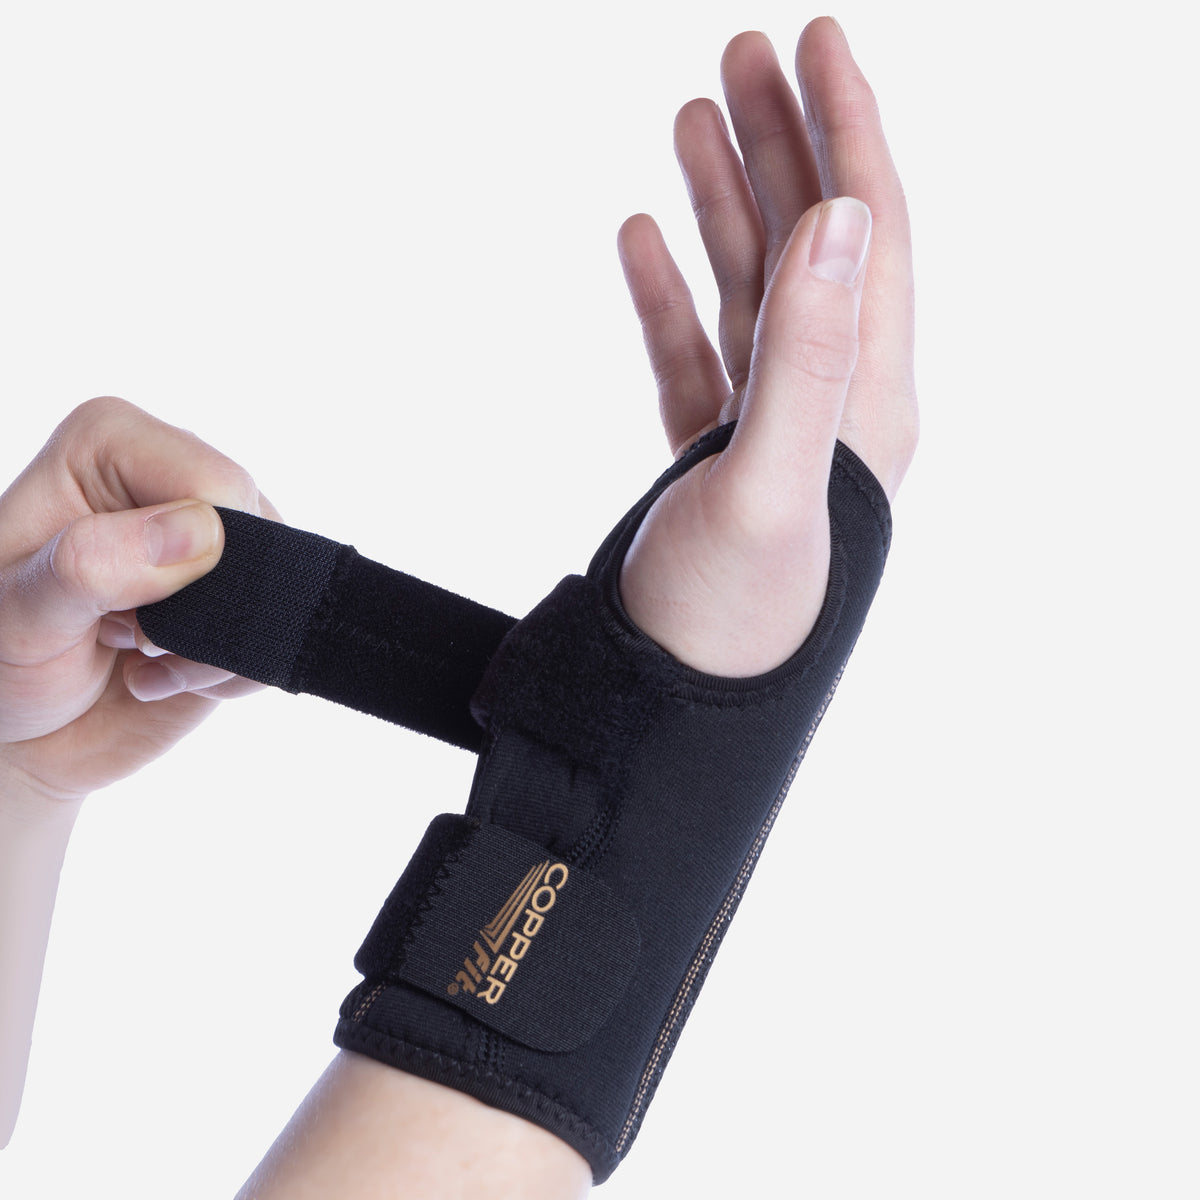 Copper Compression Wrist & Hand Support Sleeves for Wrist Tendonitis &  Arthritis - Nuova Health